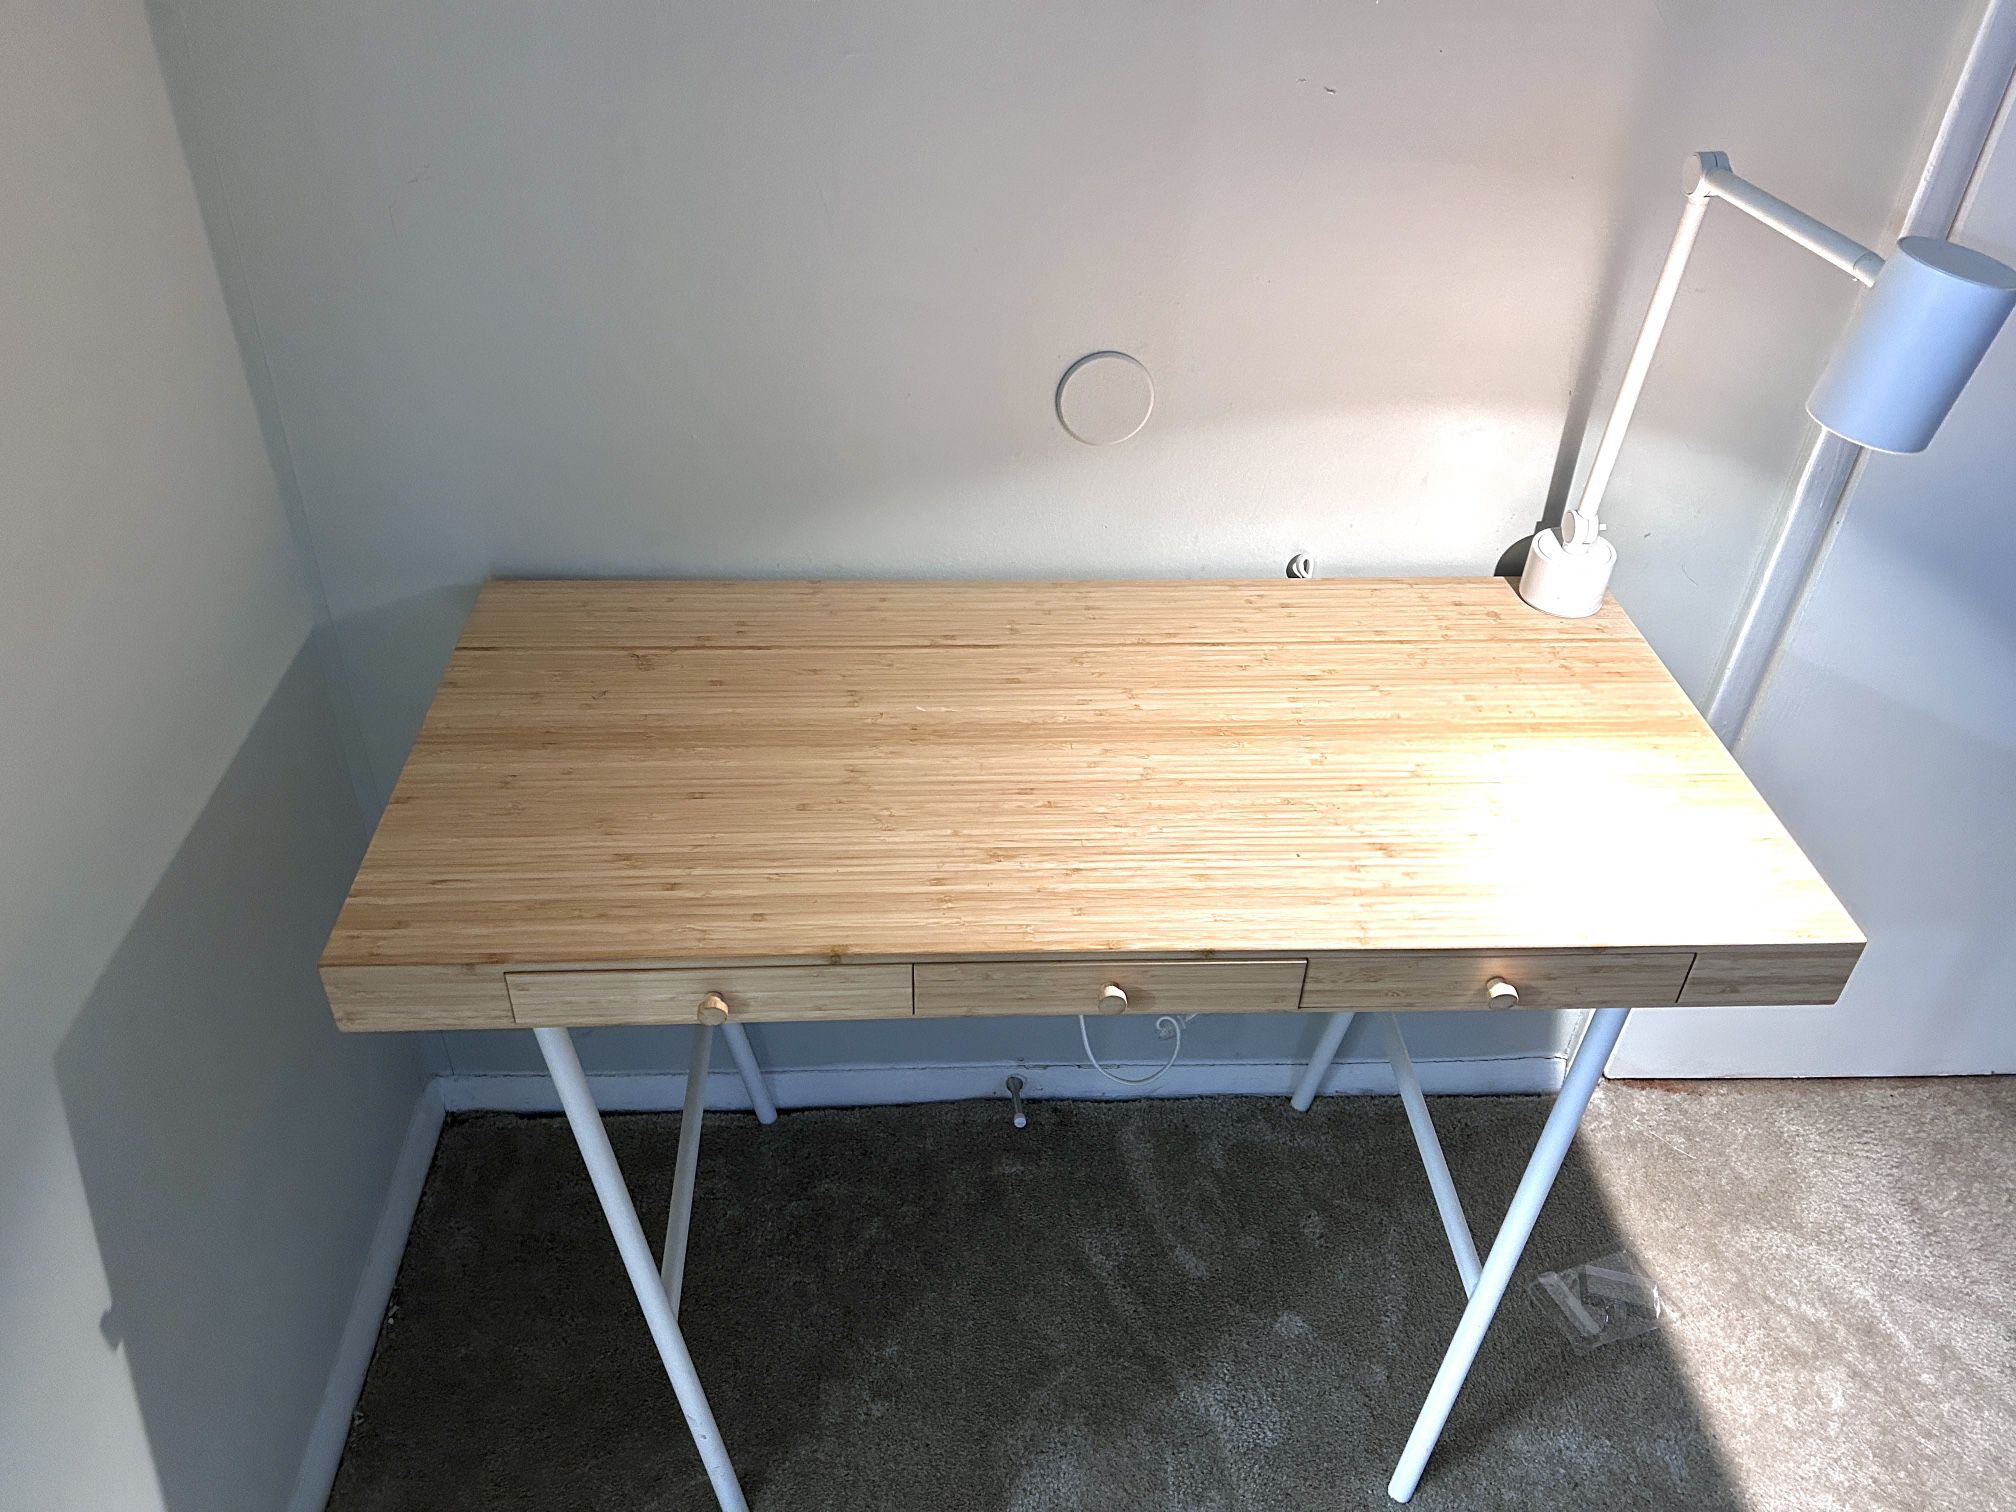 IKEA Desk With Lamp and a USB Port